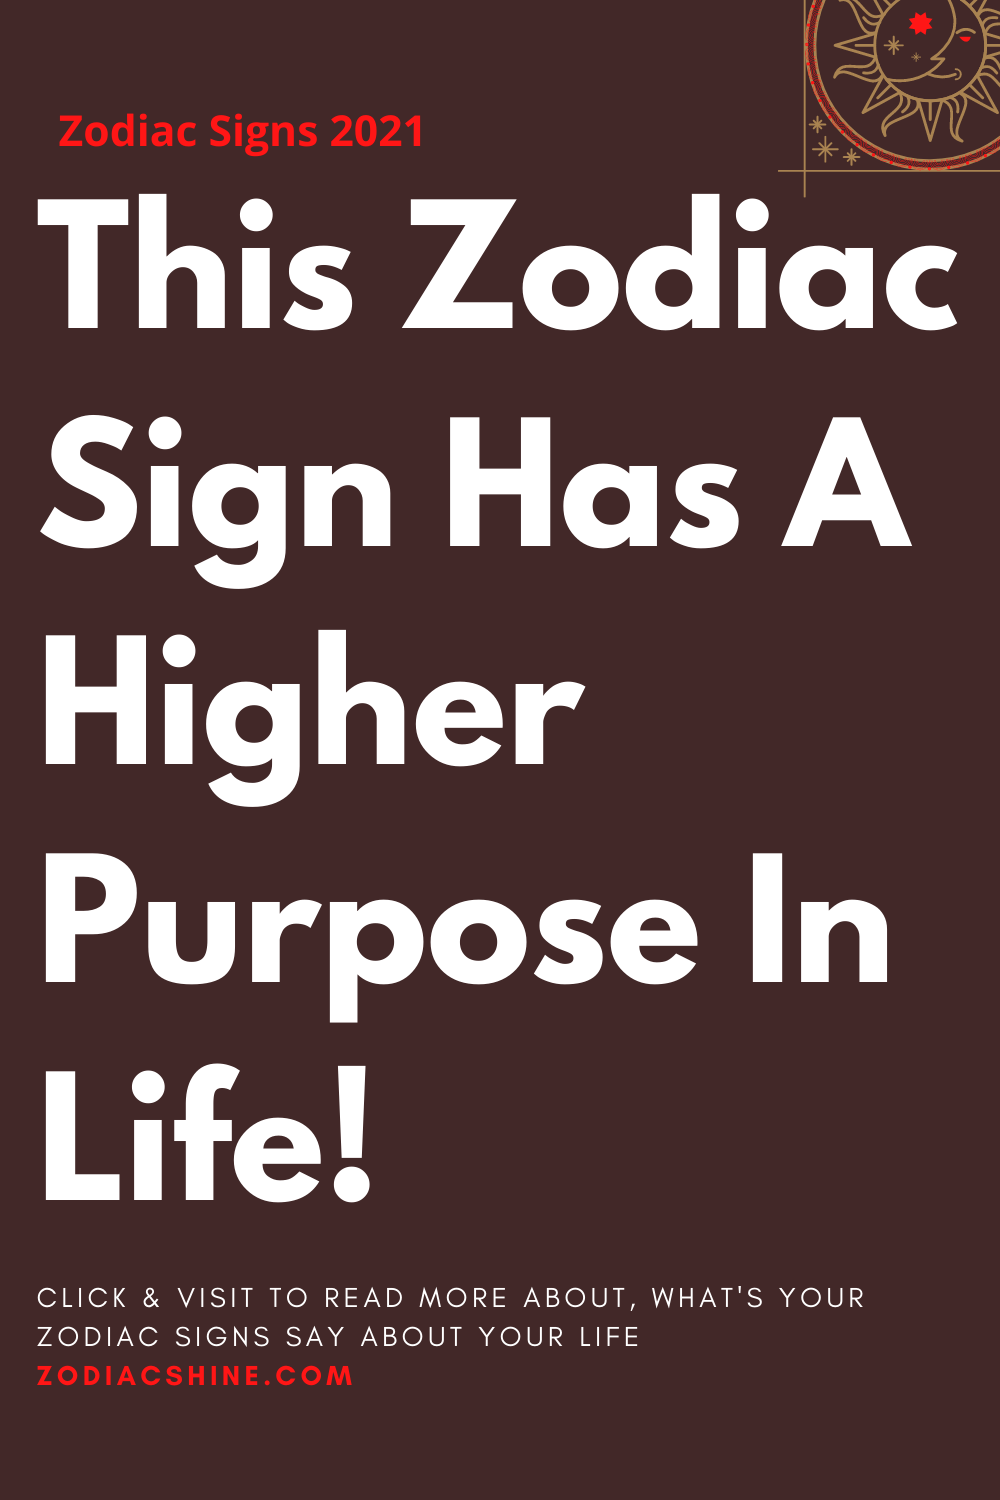 This Zodiac Sign Has A Higher Purpose In Life!